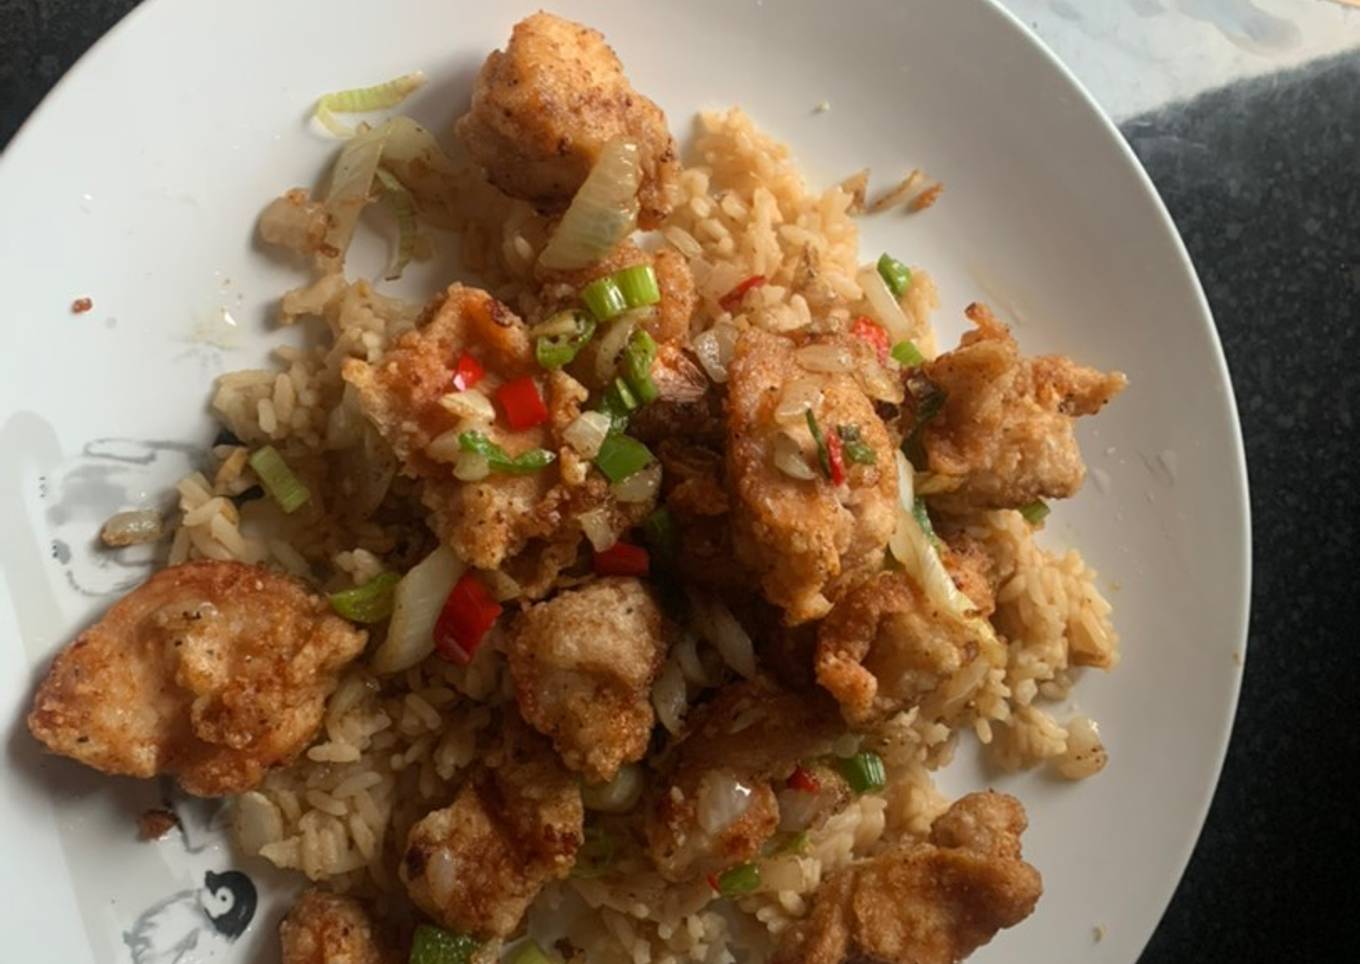 Salt and pepper chicken (Chinese takeaway style)